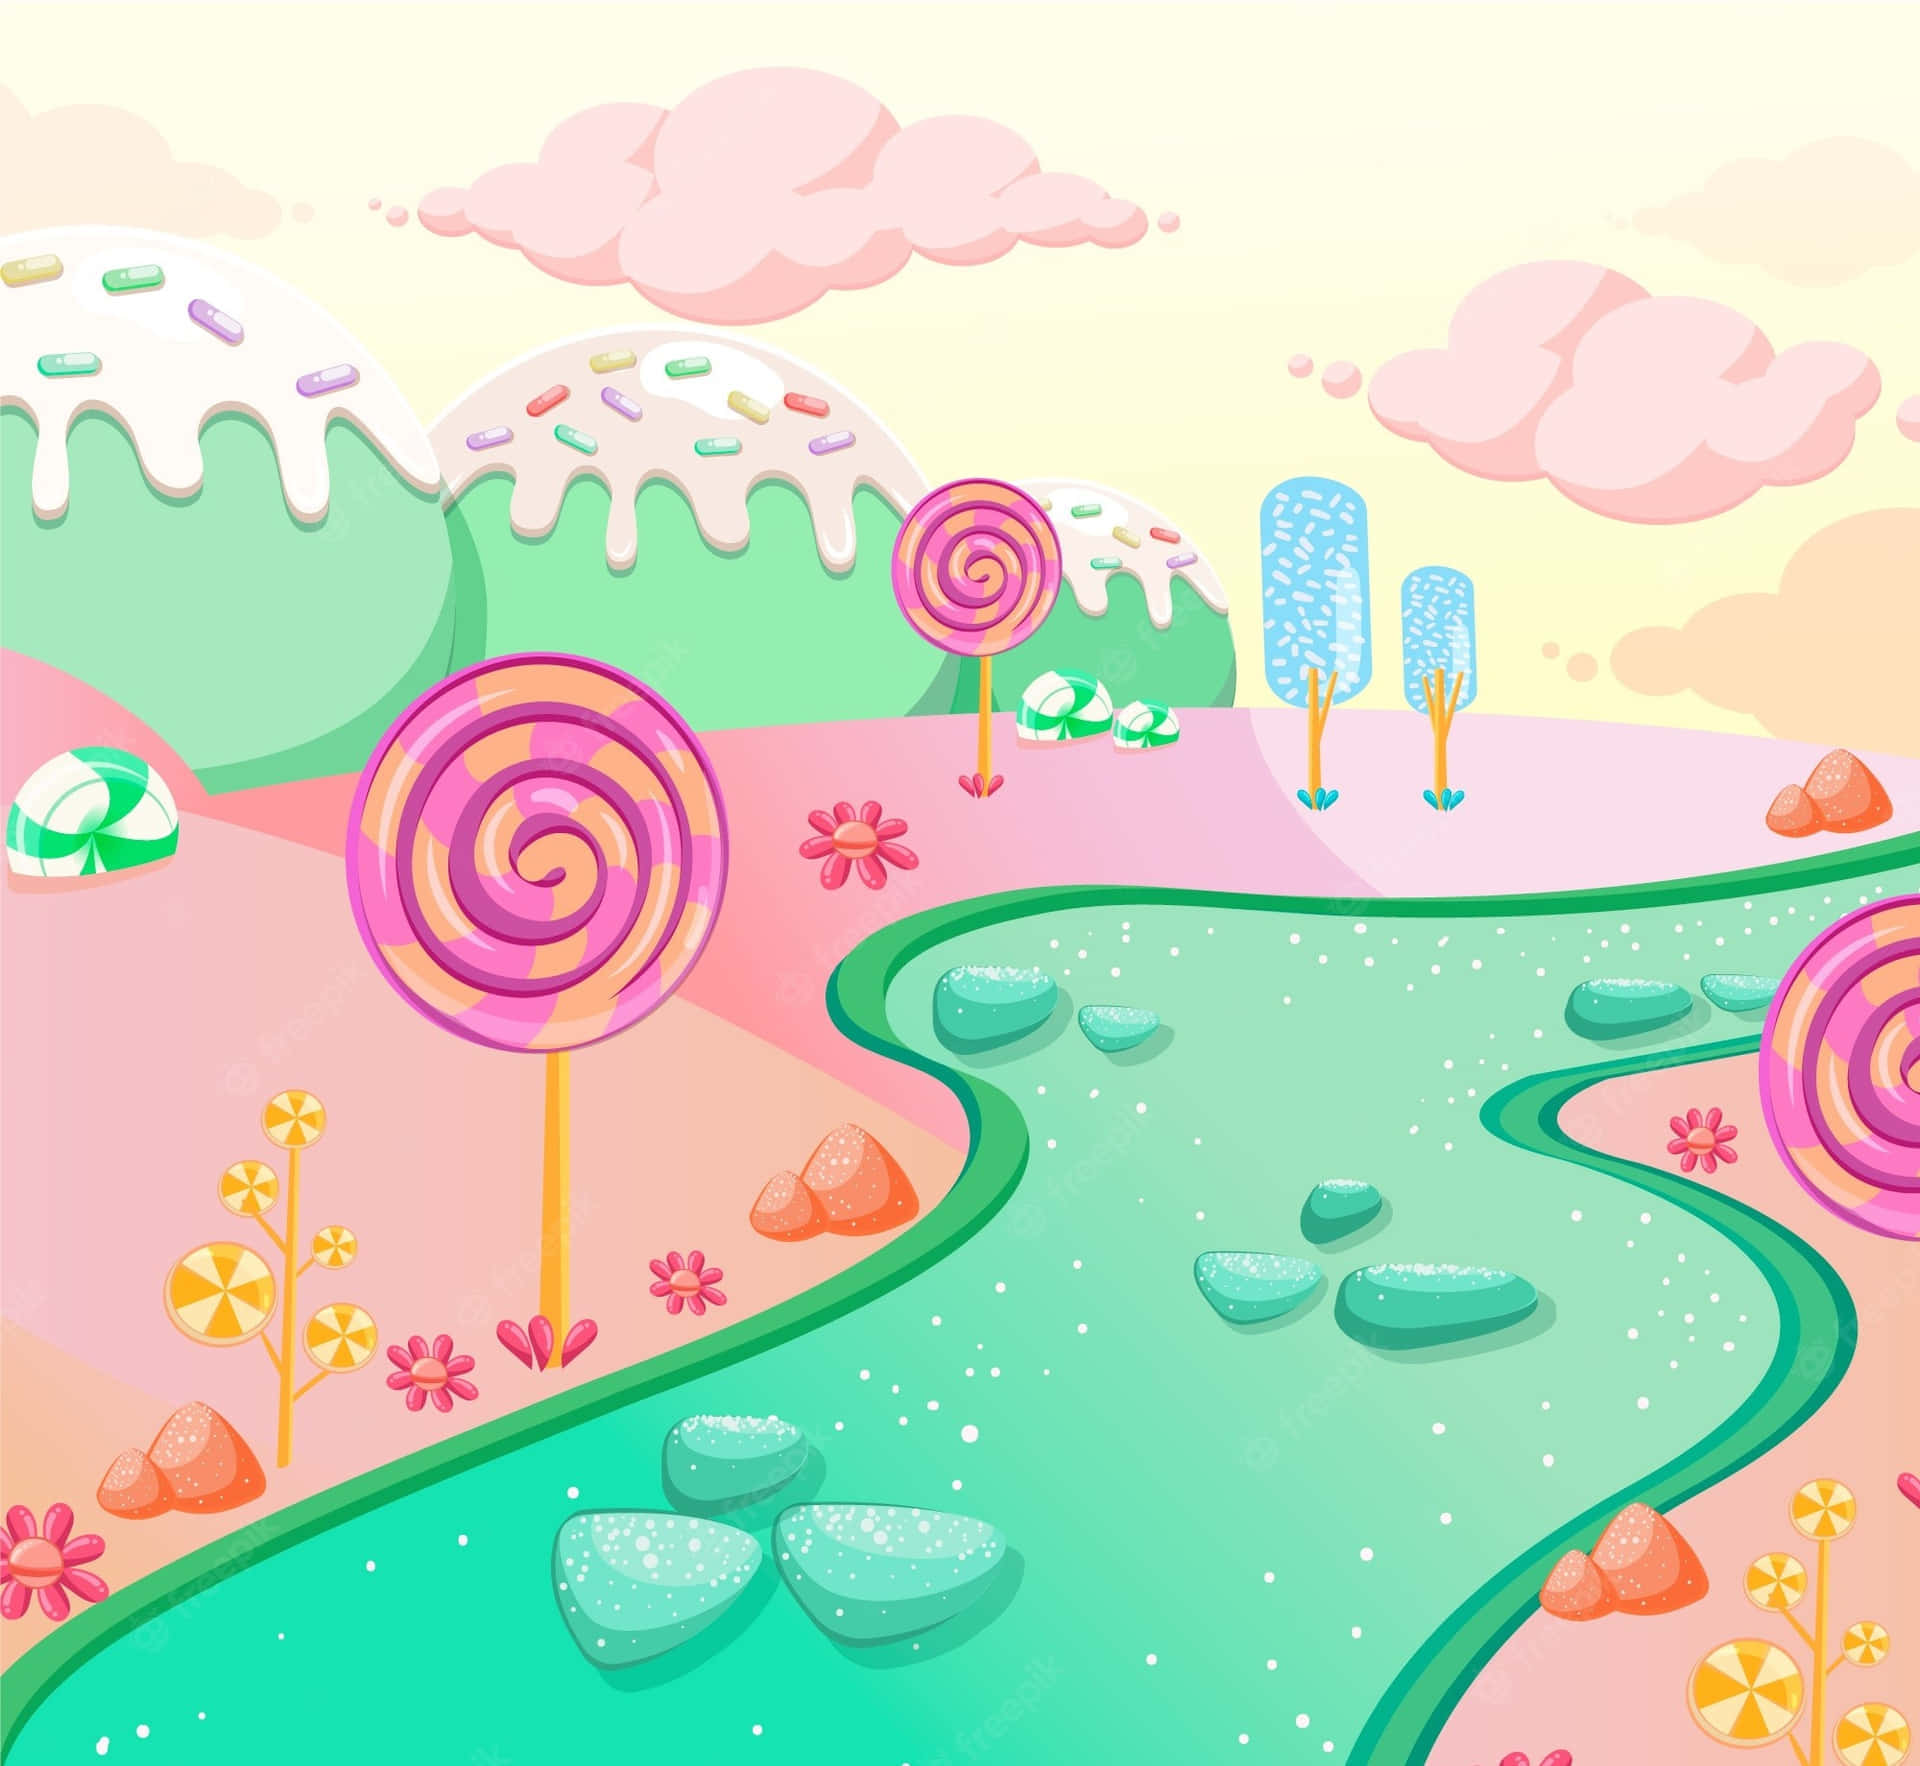 "Indulge in a whimsical world of candyland"